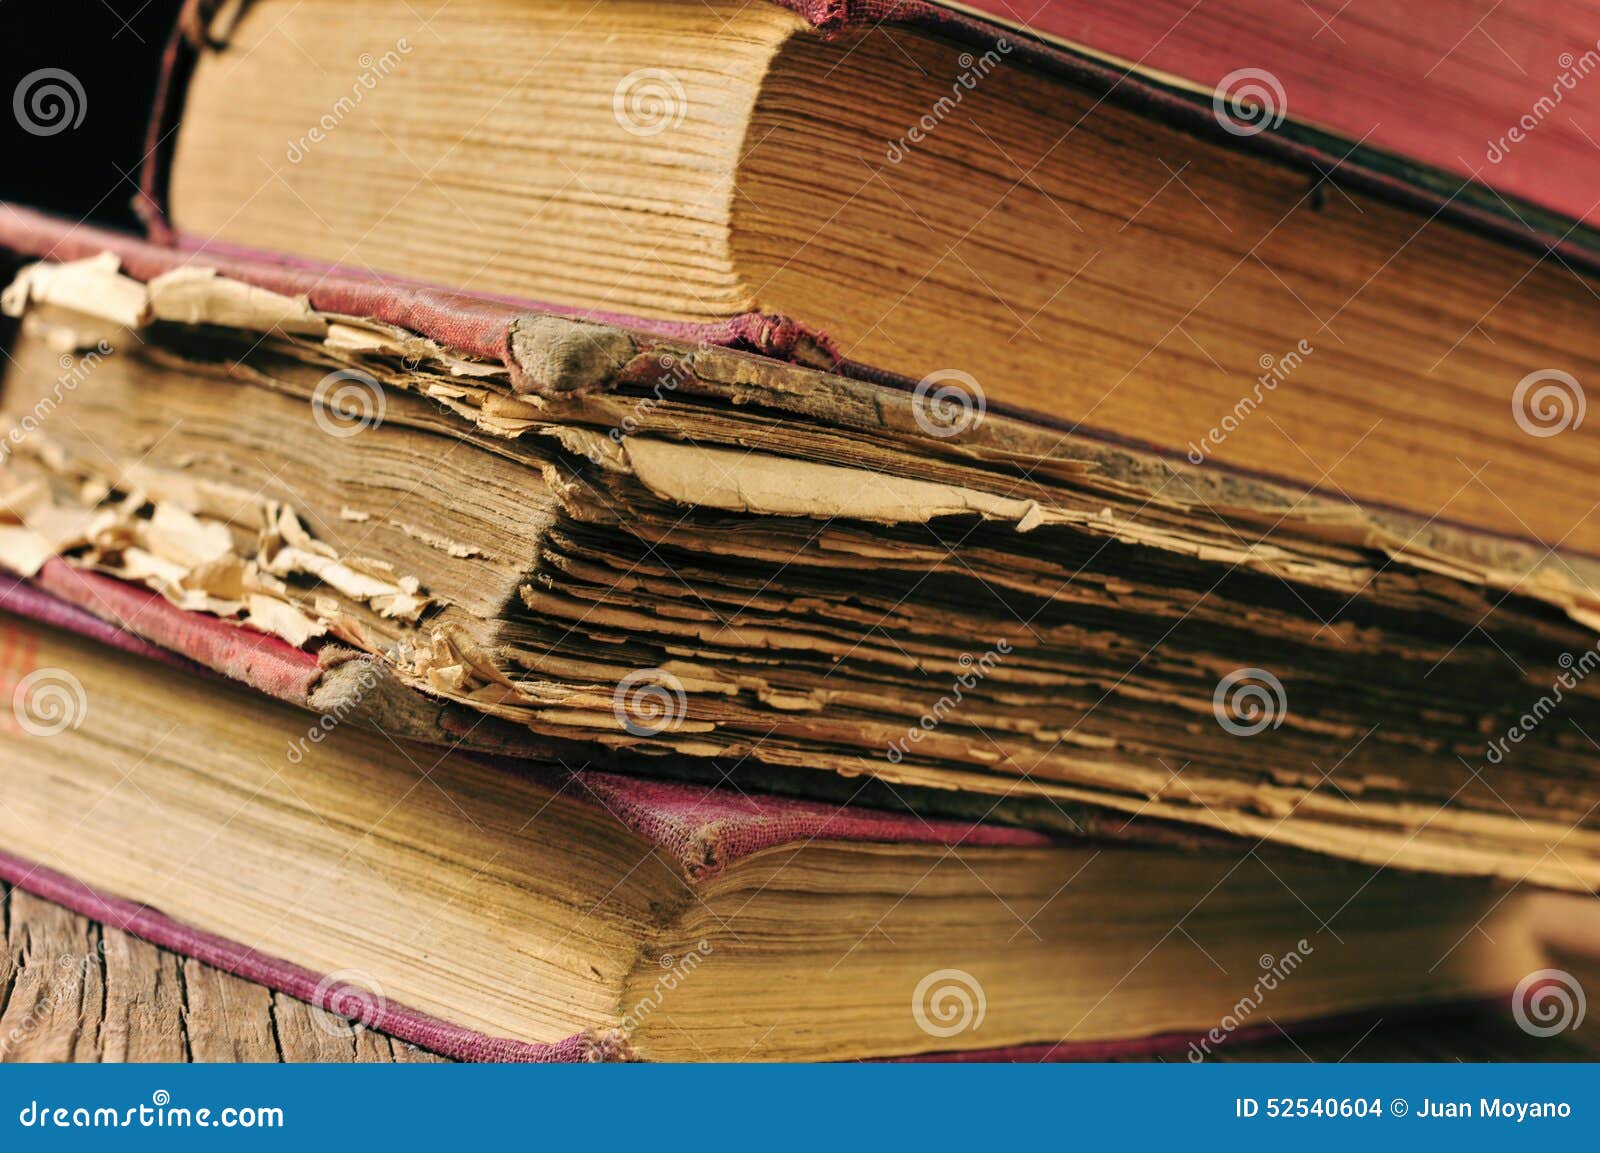 worn-out old books